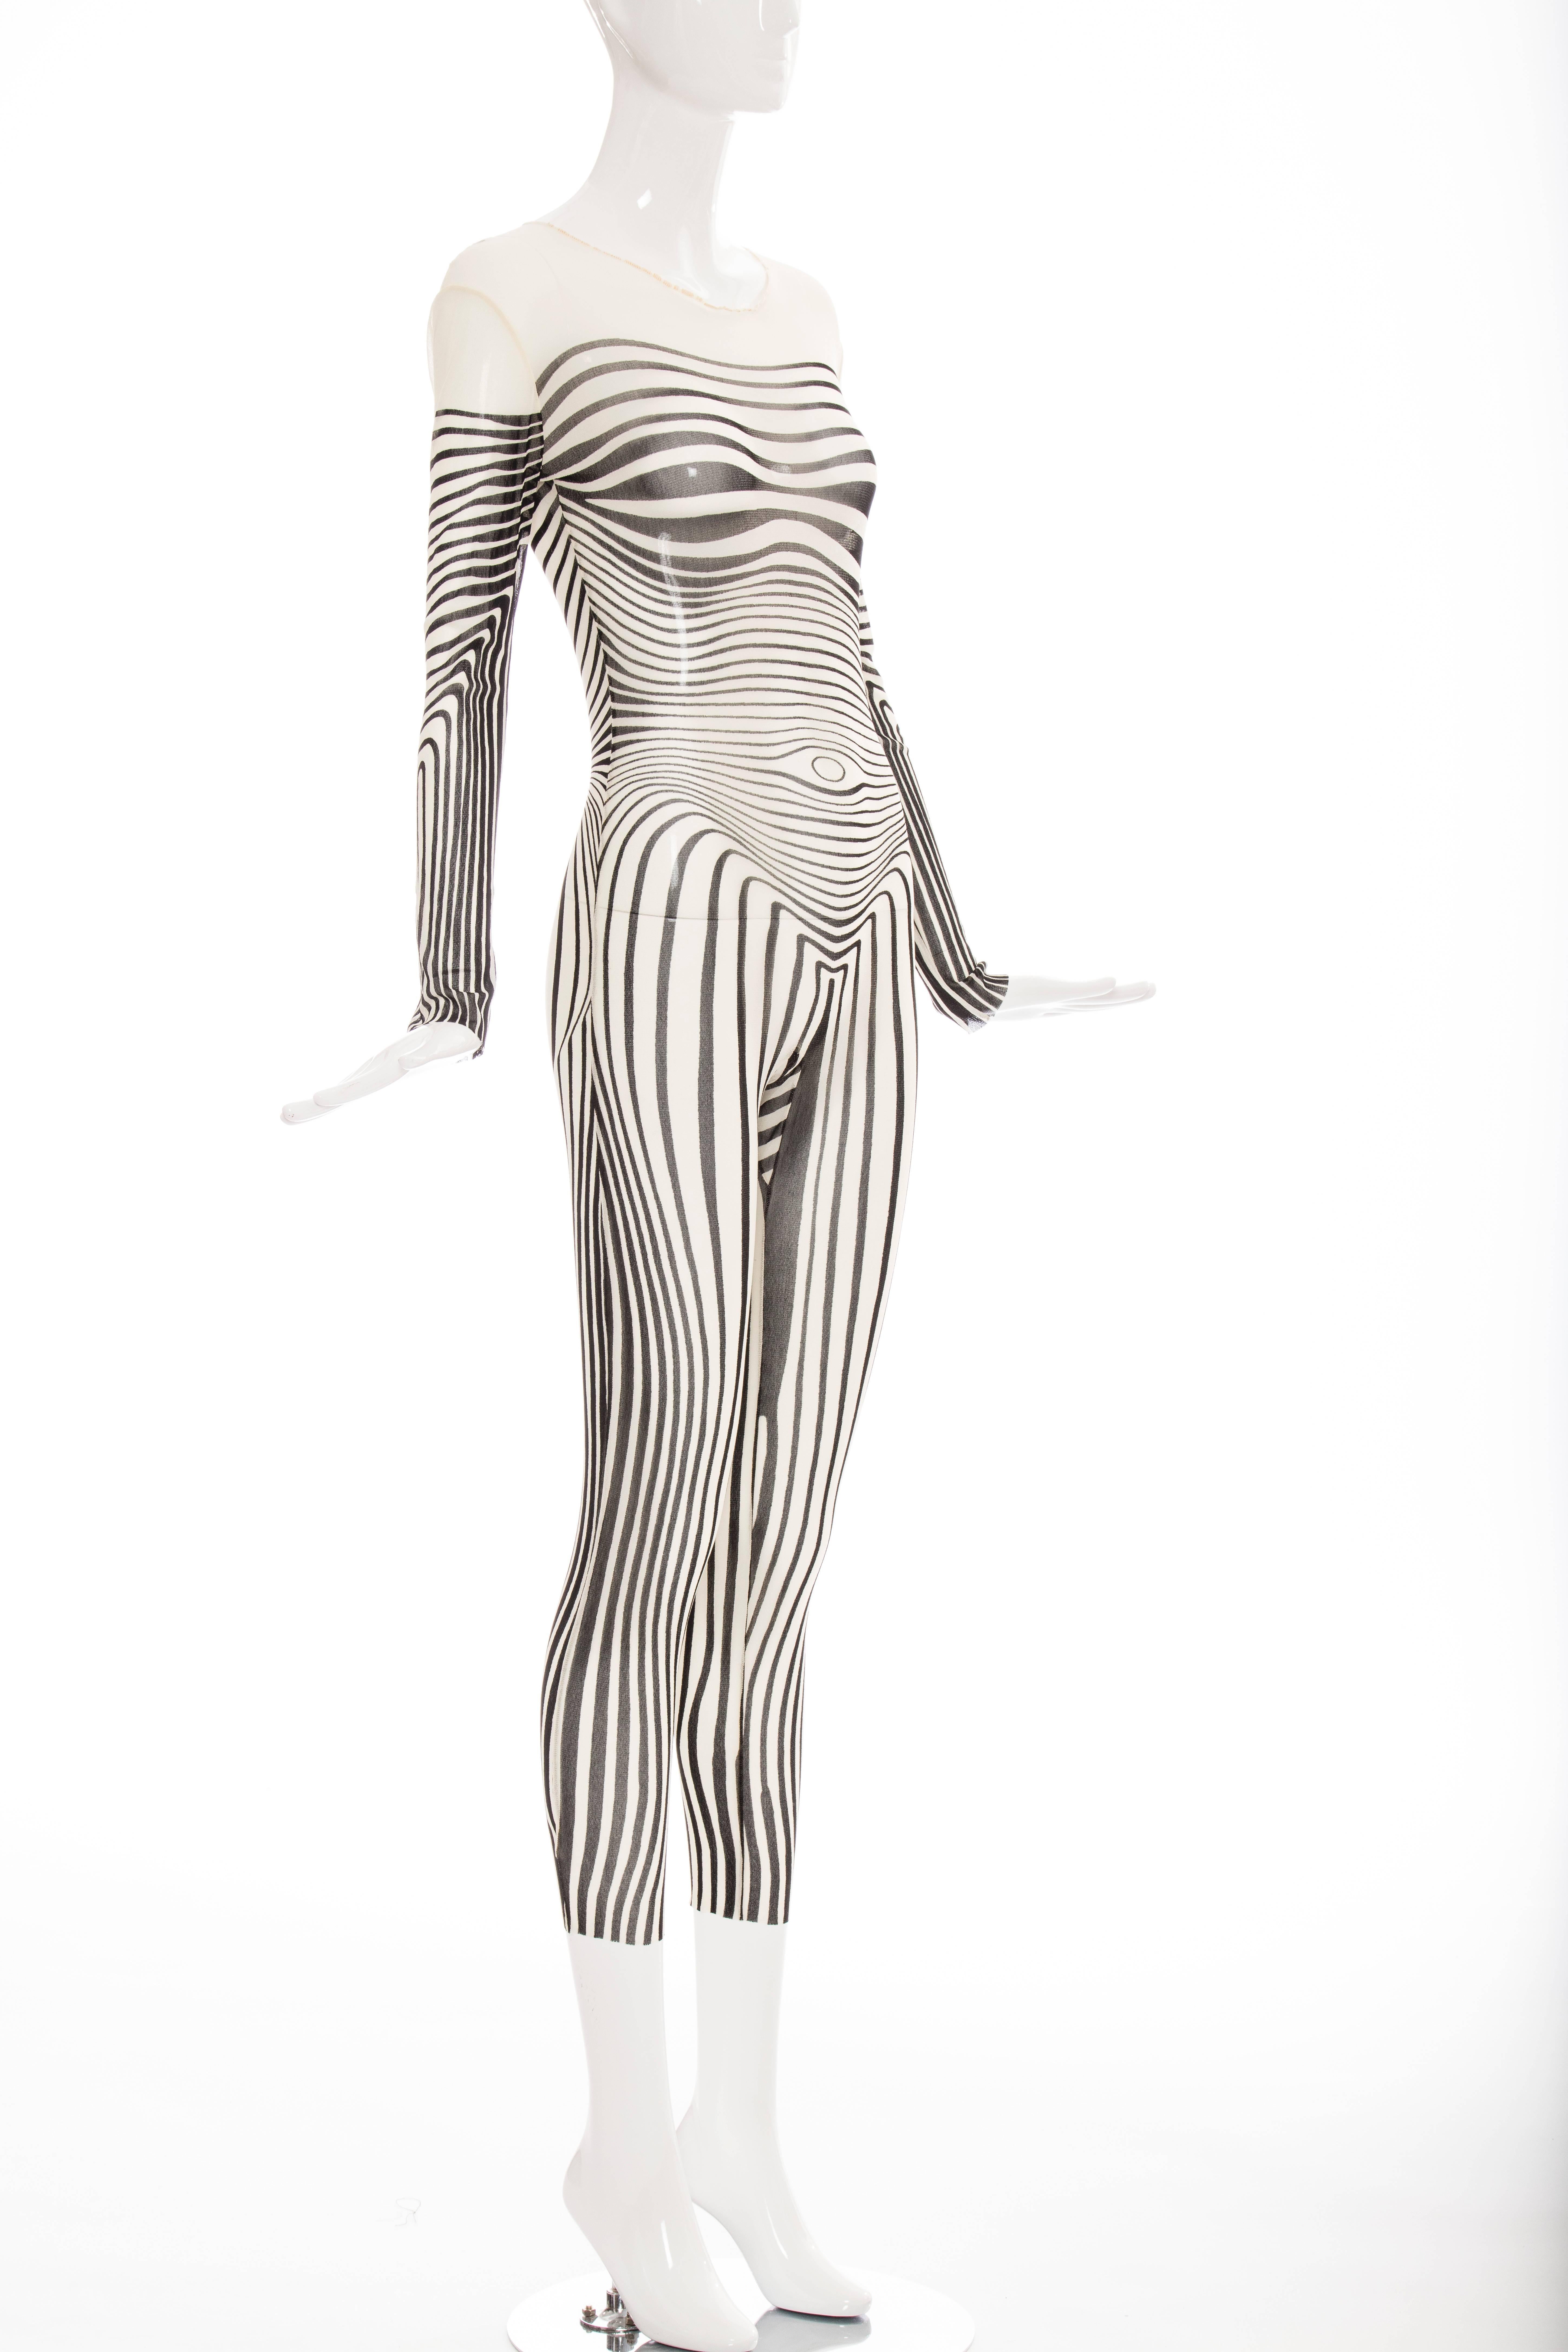 Jean Paul Gaultier, Spring - Summer 1996 stretch-jersey bodysuit printed with body contours, back zip and Maille labelled.

Labeled Large fits Medium